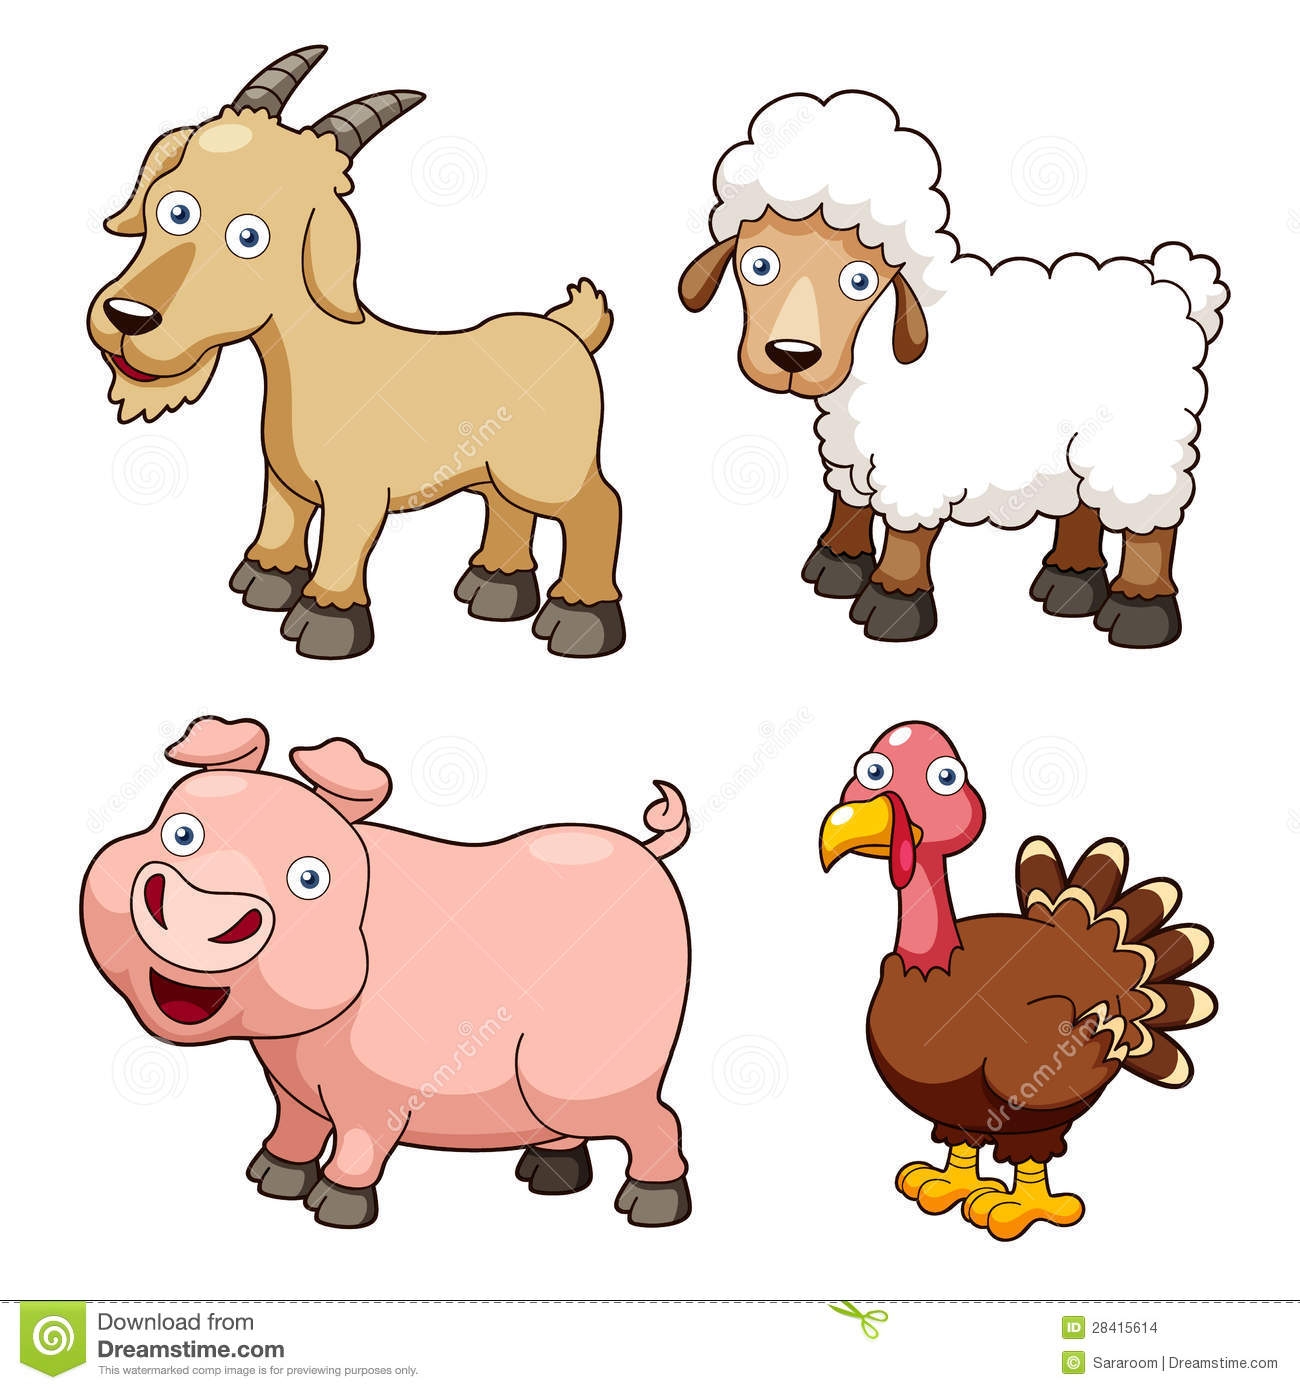 animals clipart download - photo #32